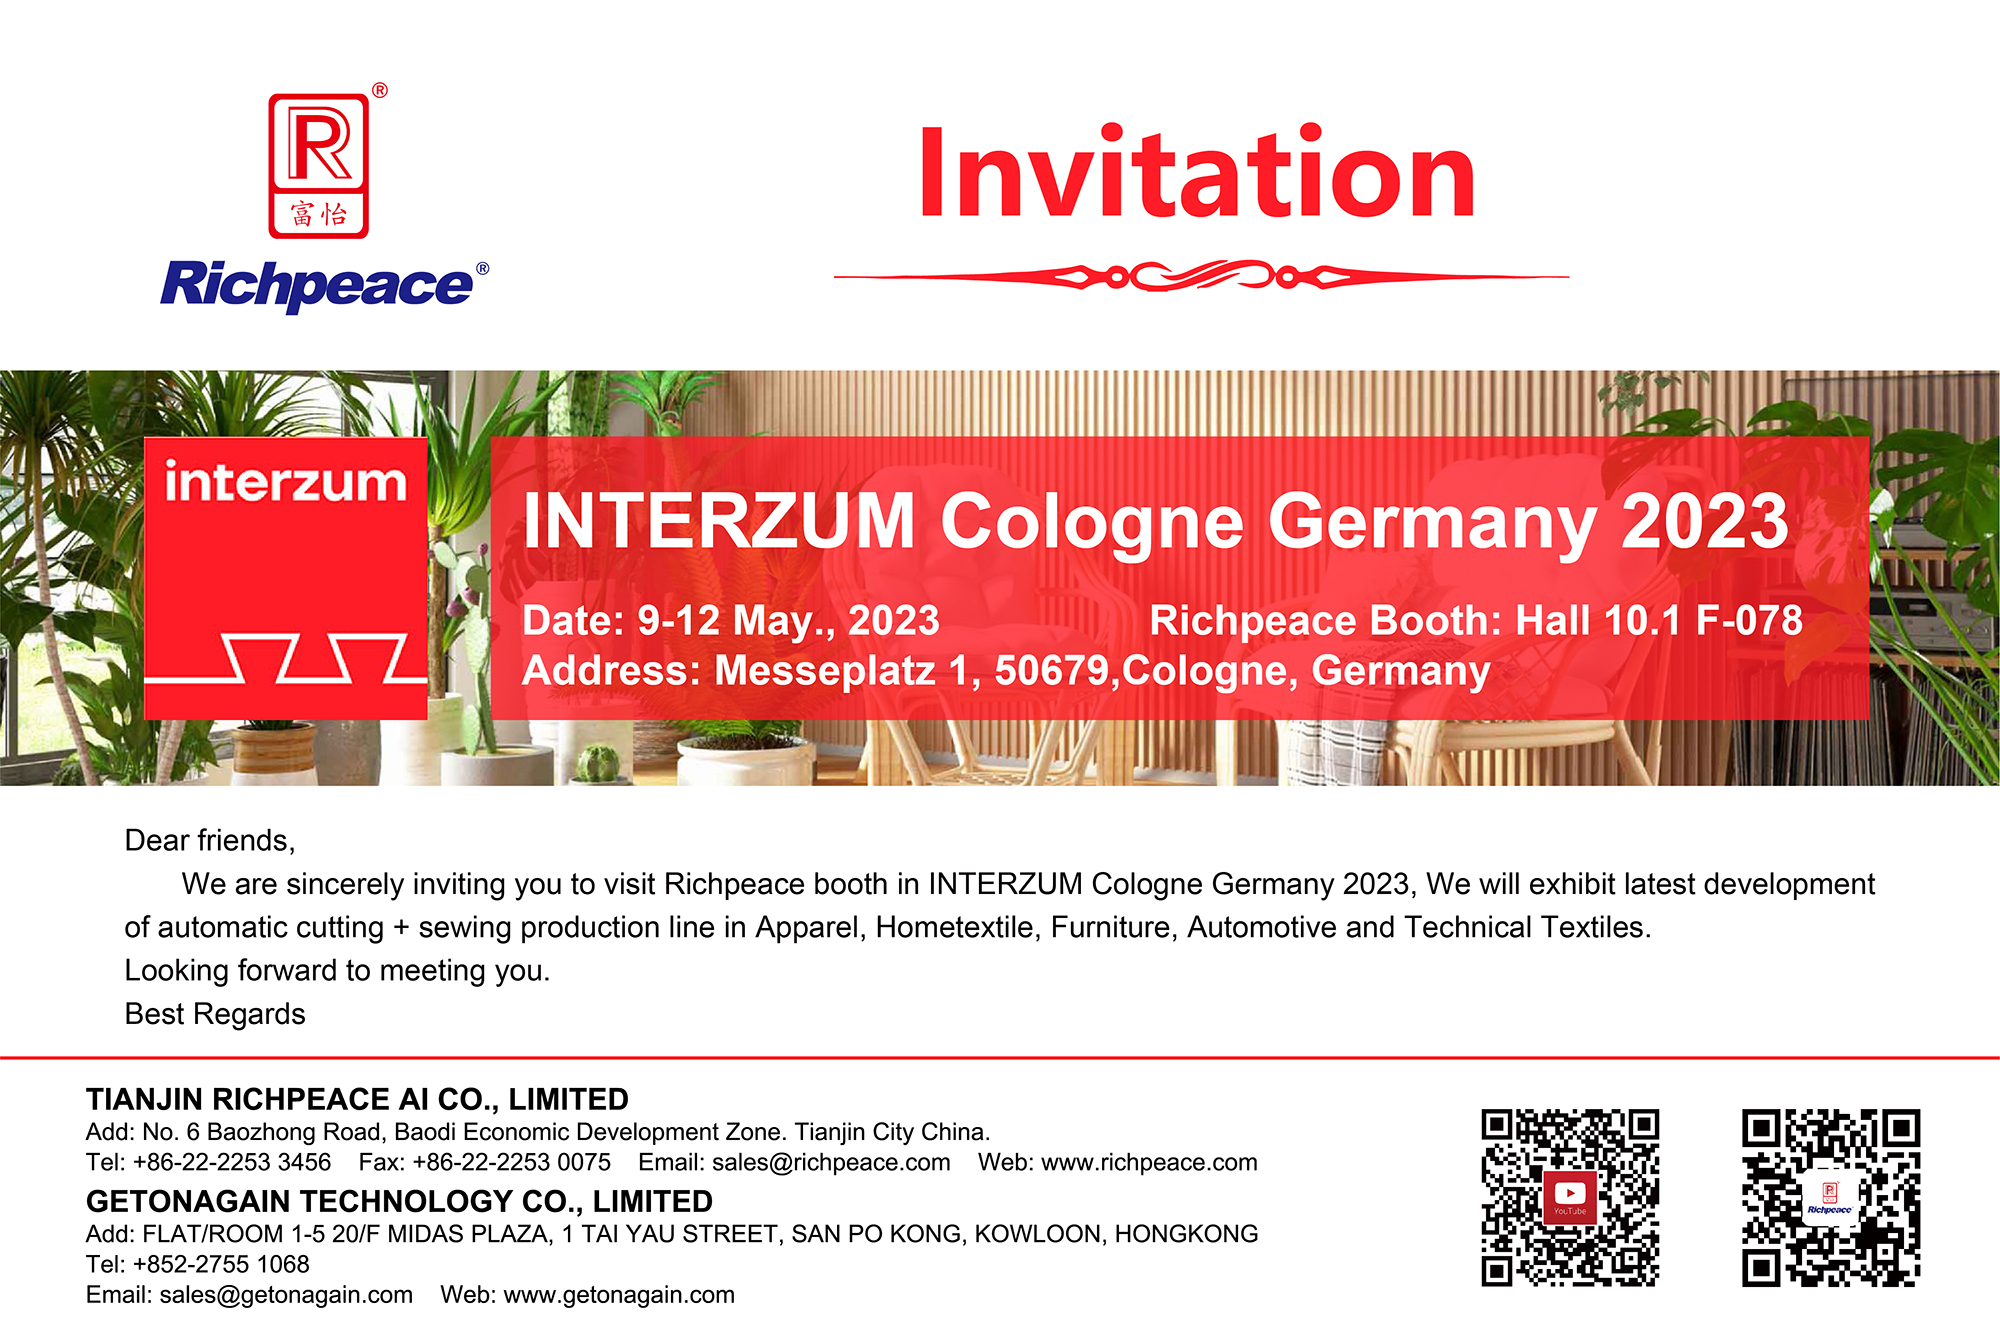 INTERZUM Cologne Germany 2023